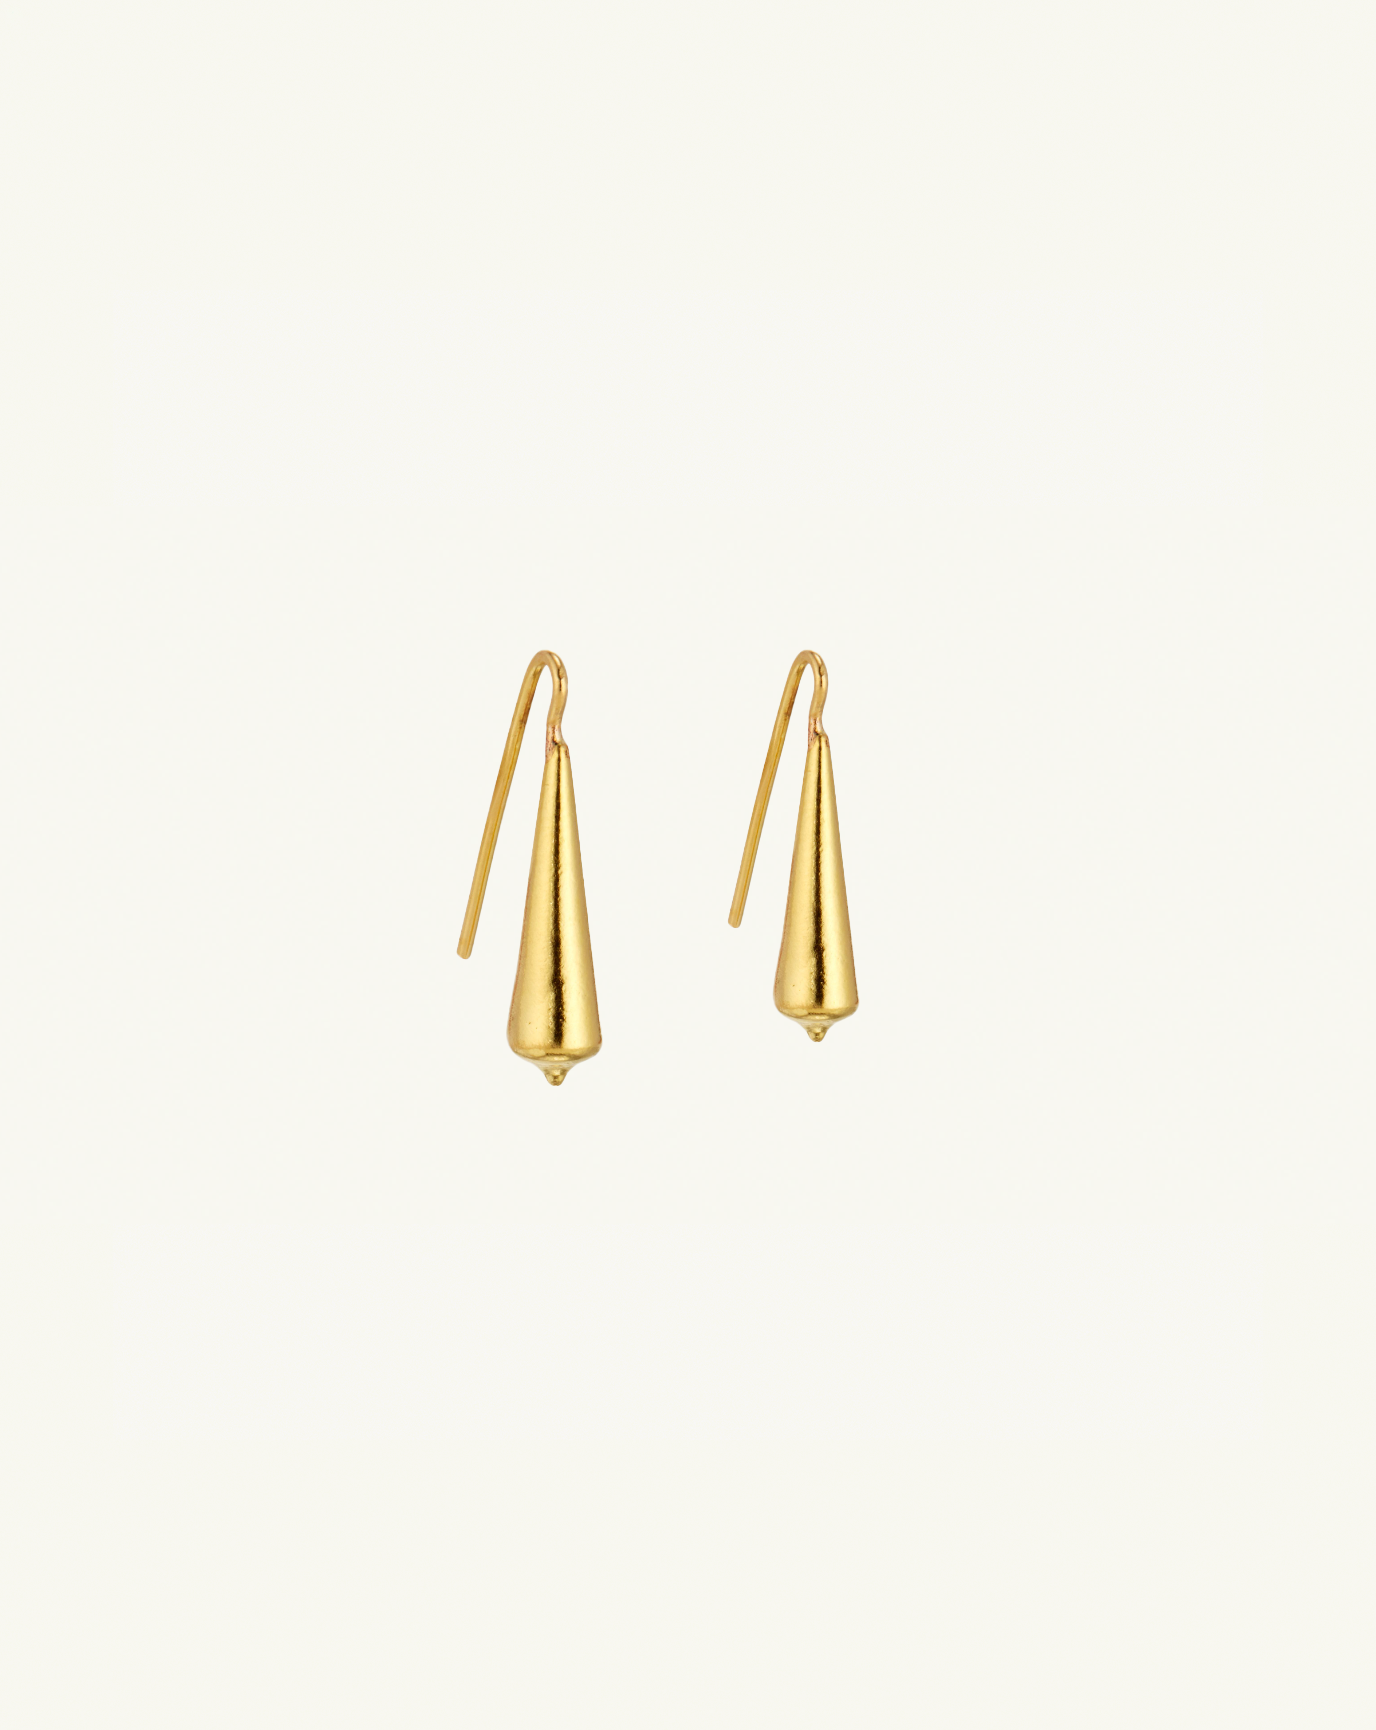 Product image of the tapered gold pod earrings with the back stems showing